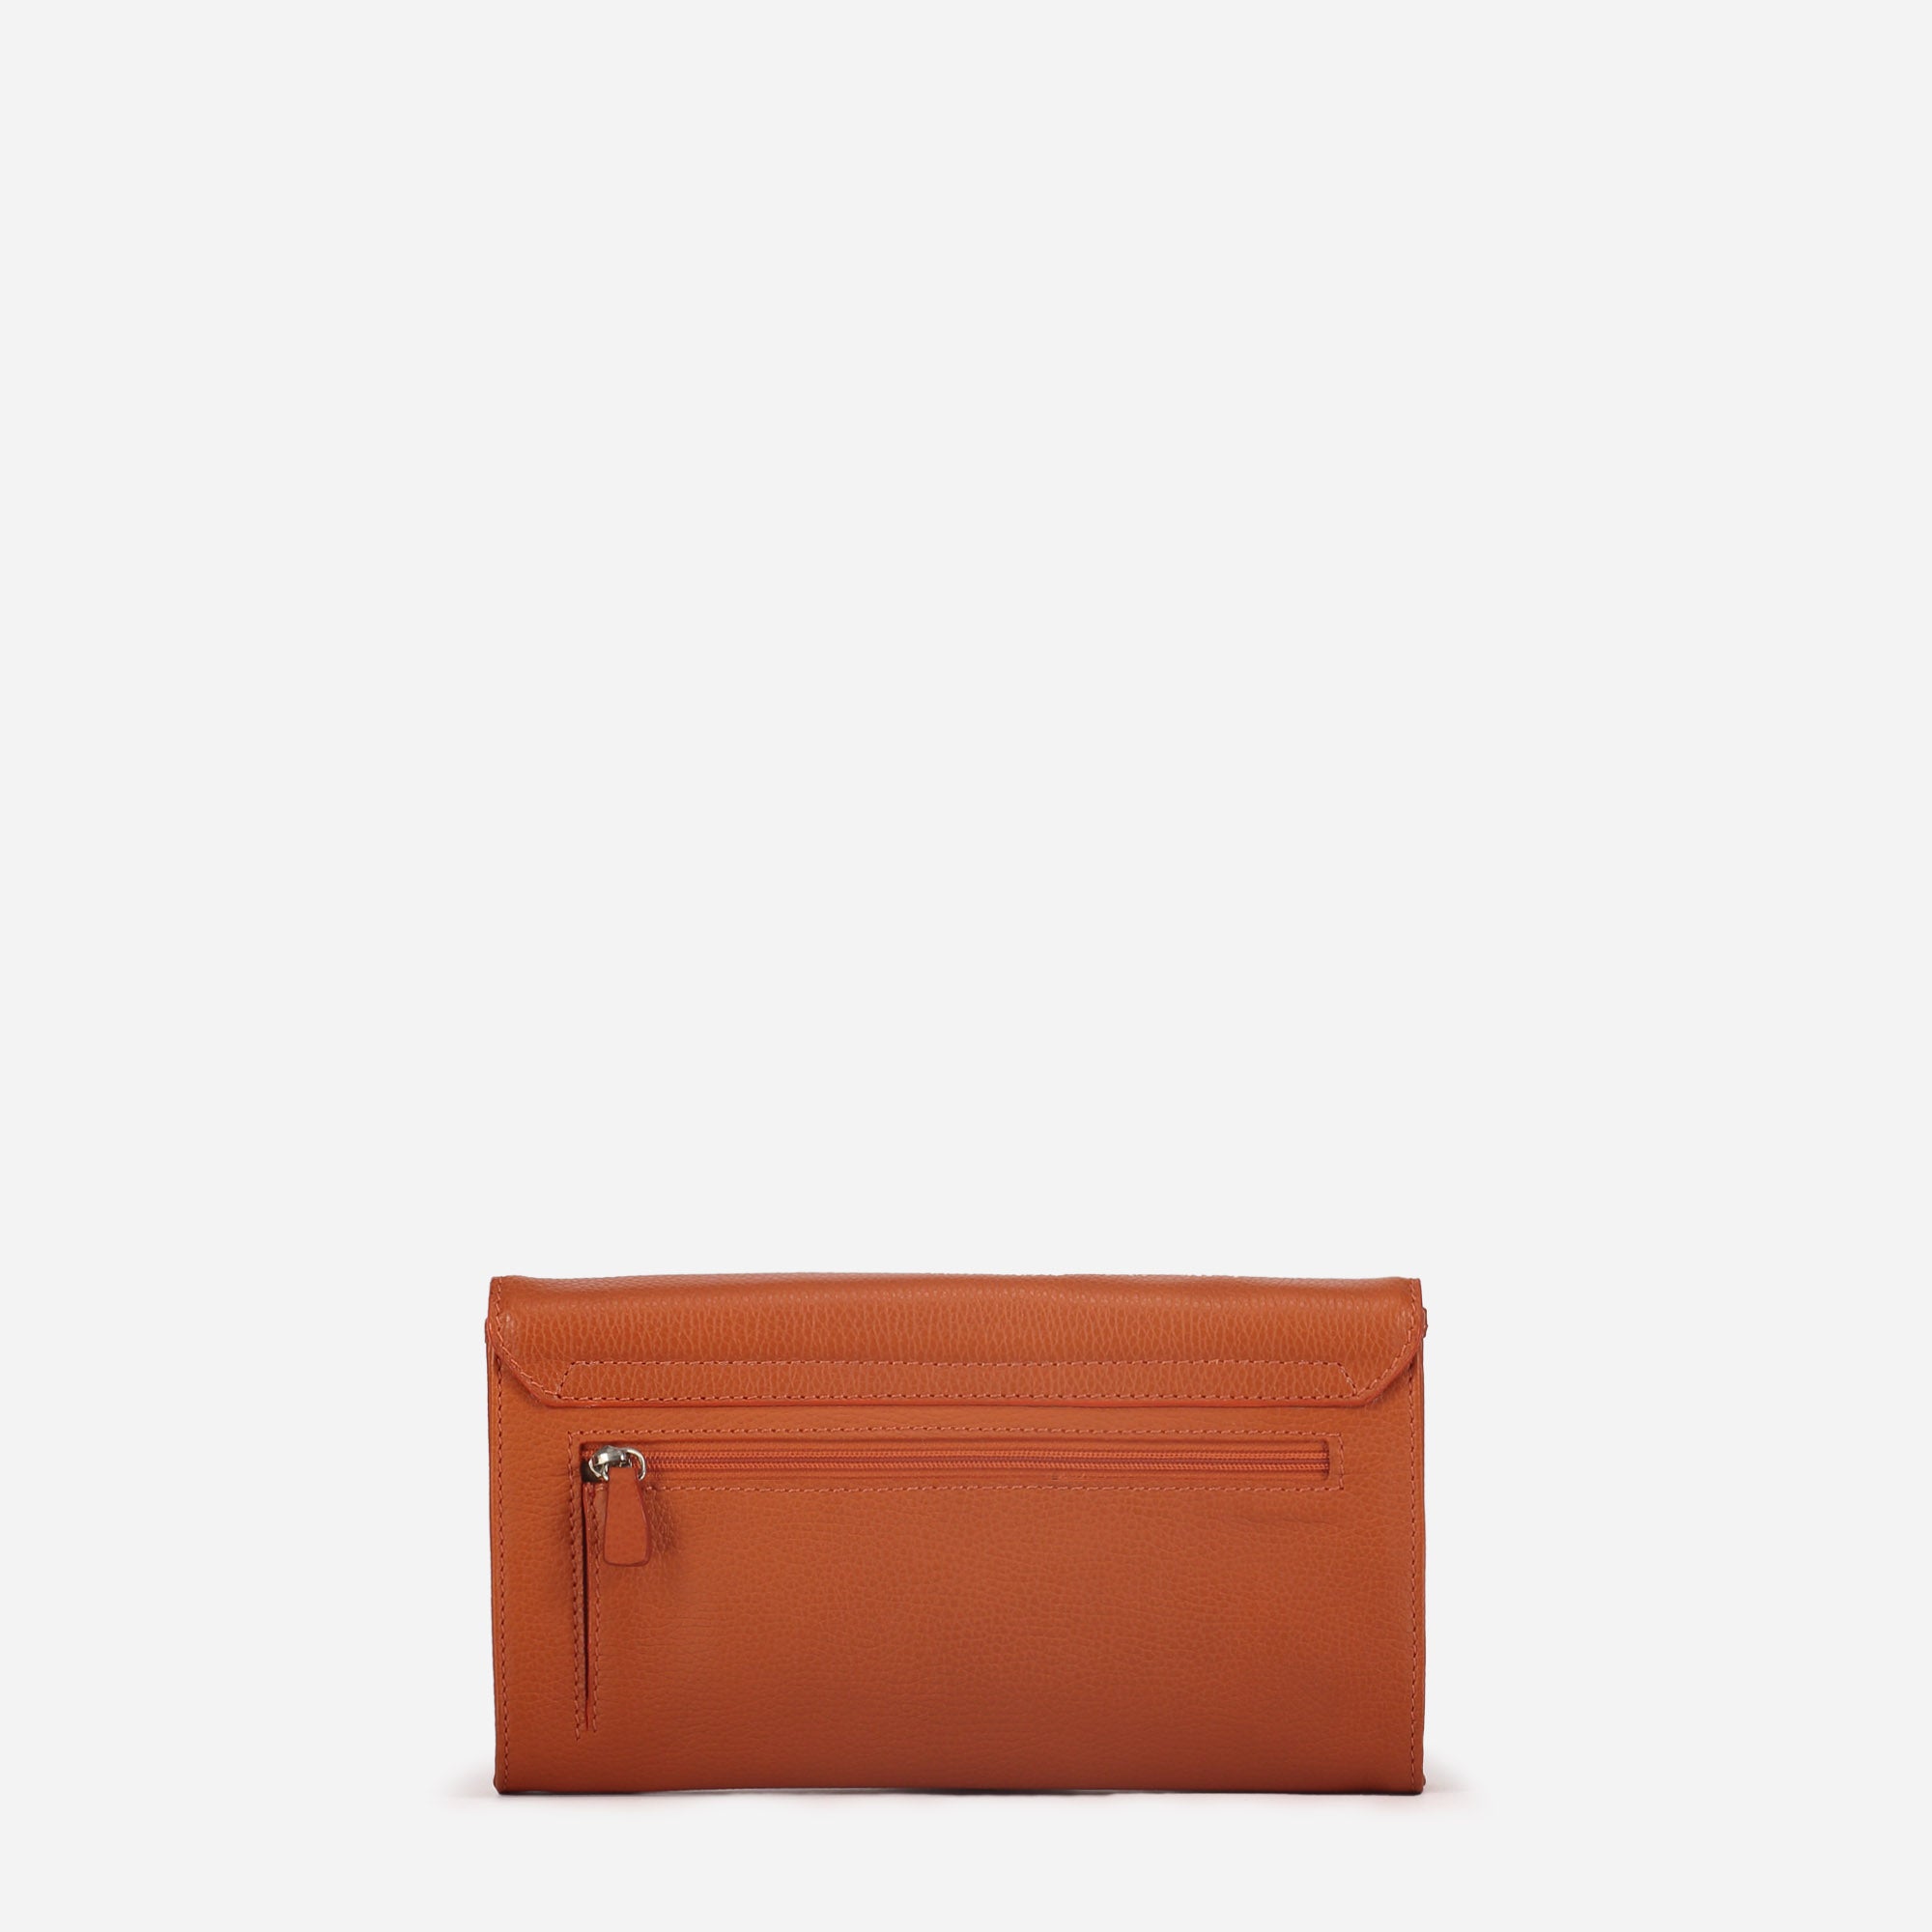 593 – CLUTCH<br>Embossed calf skin leather